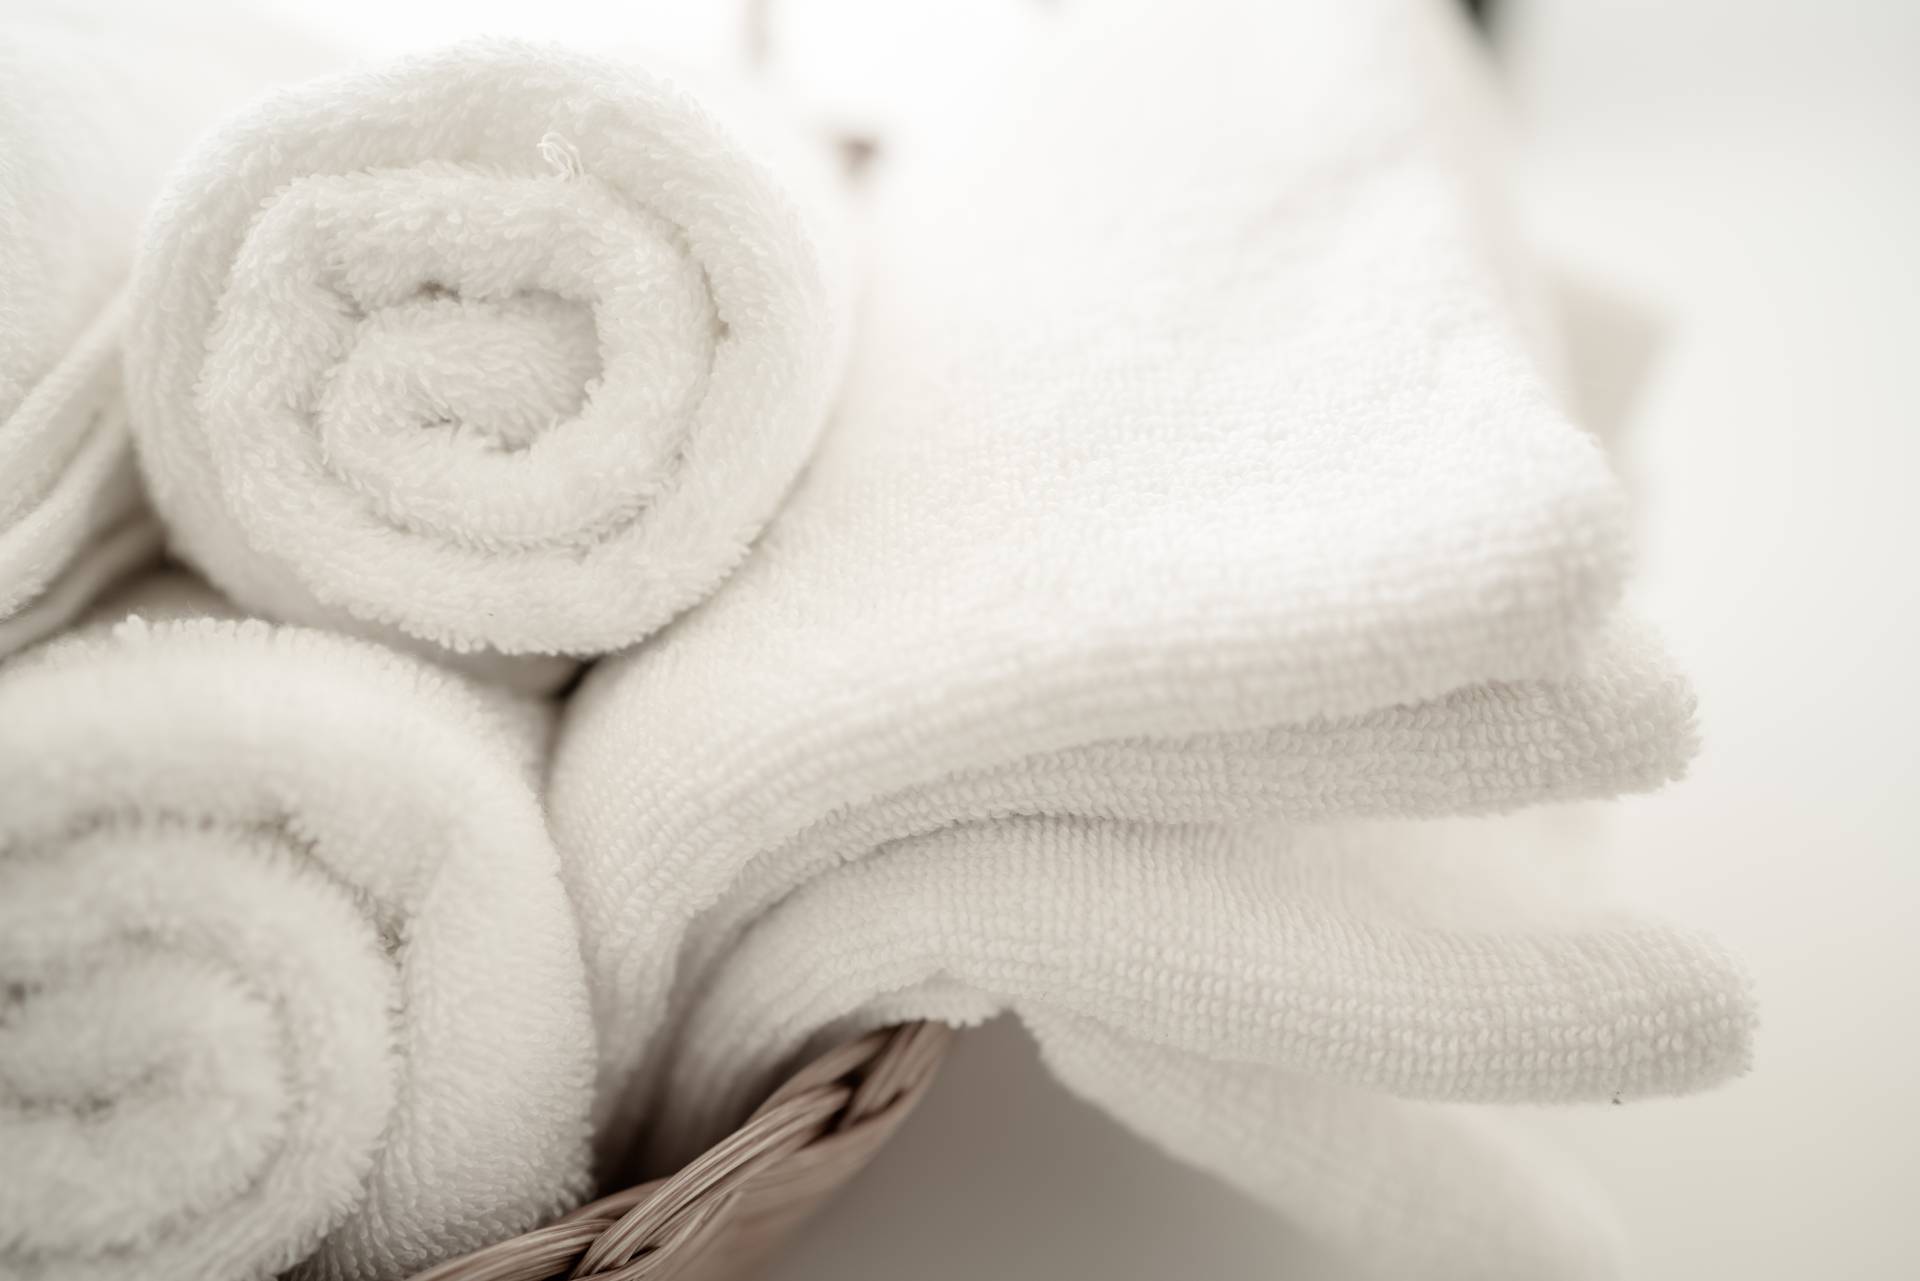 How to wash towels